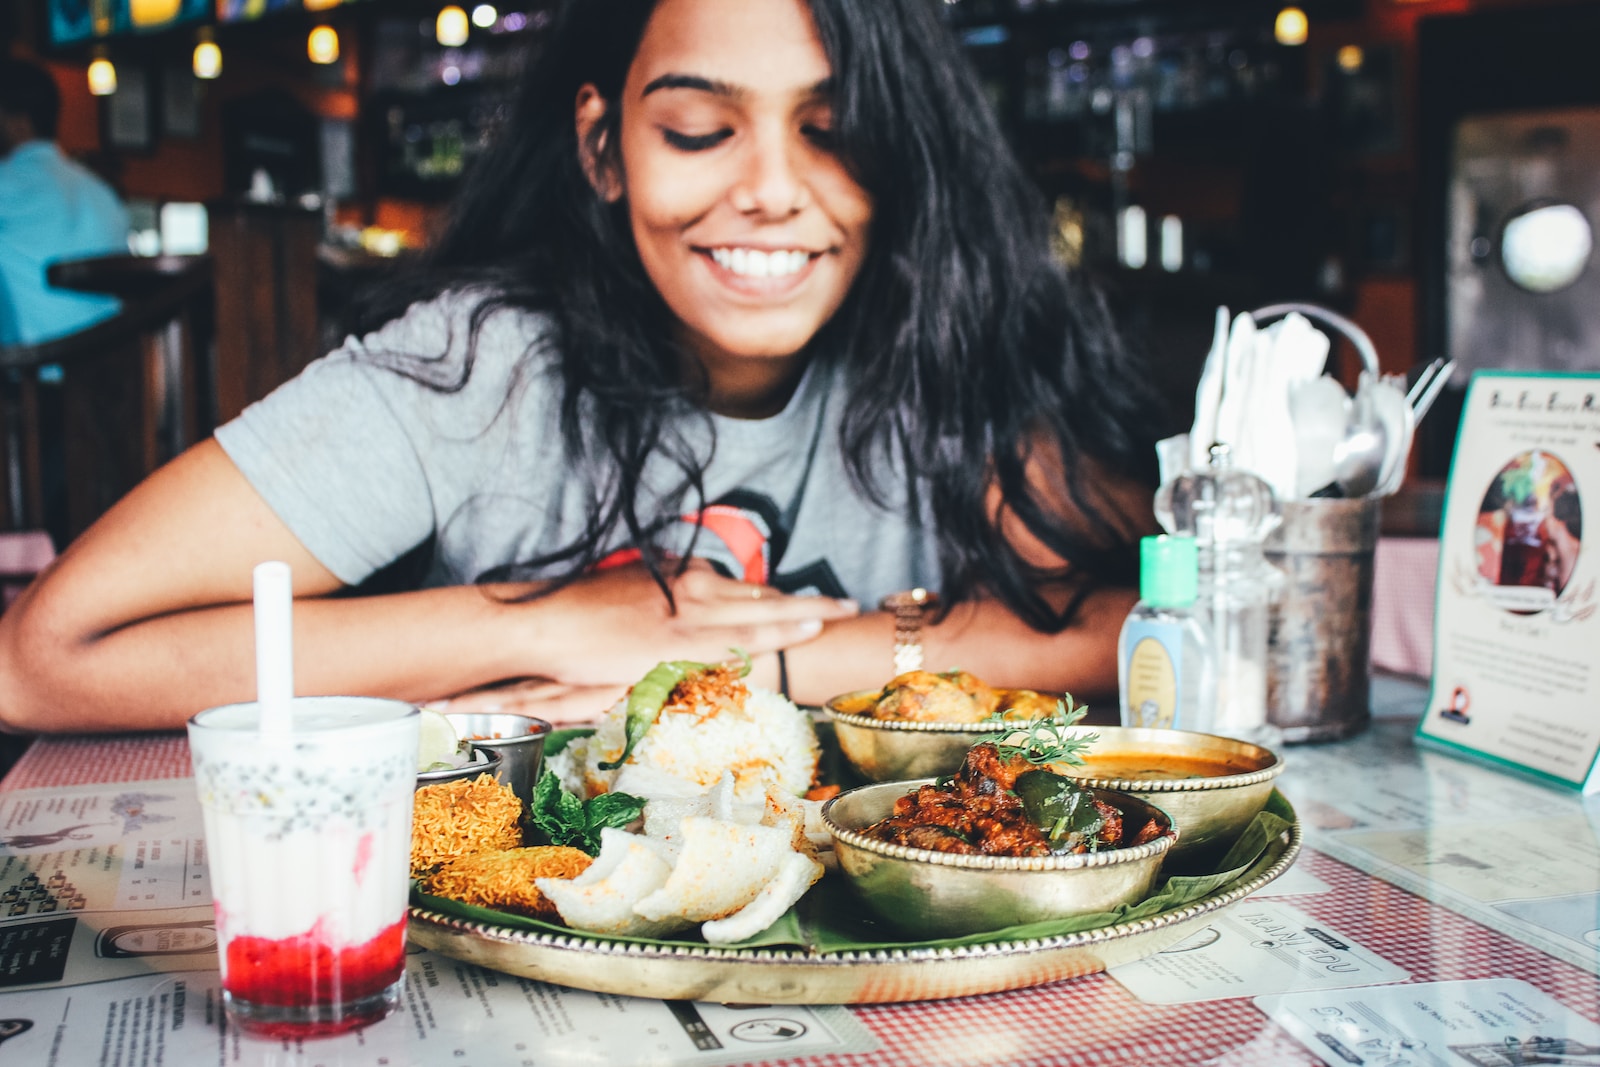 A healthy relationship with food through mindful eating gratitude